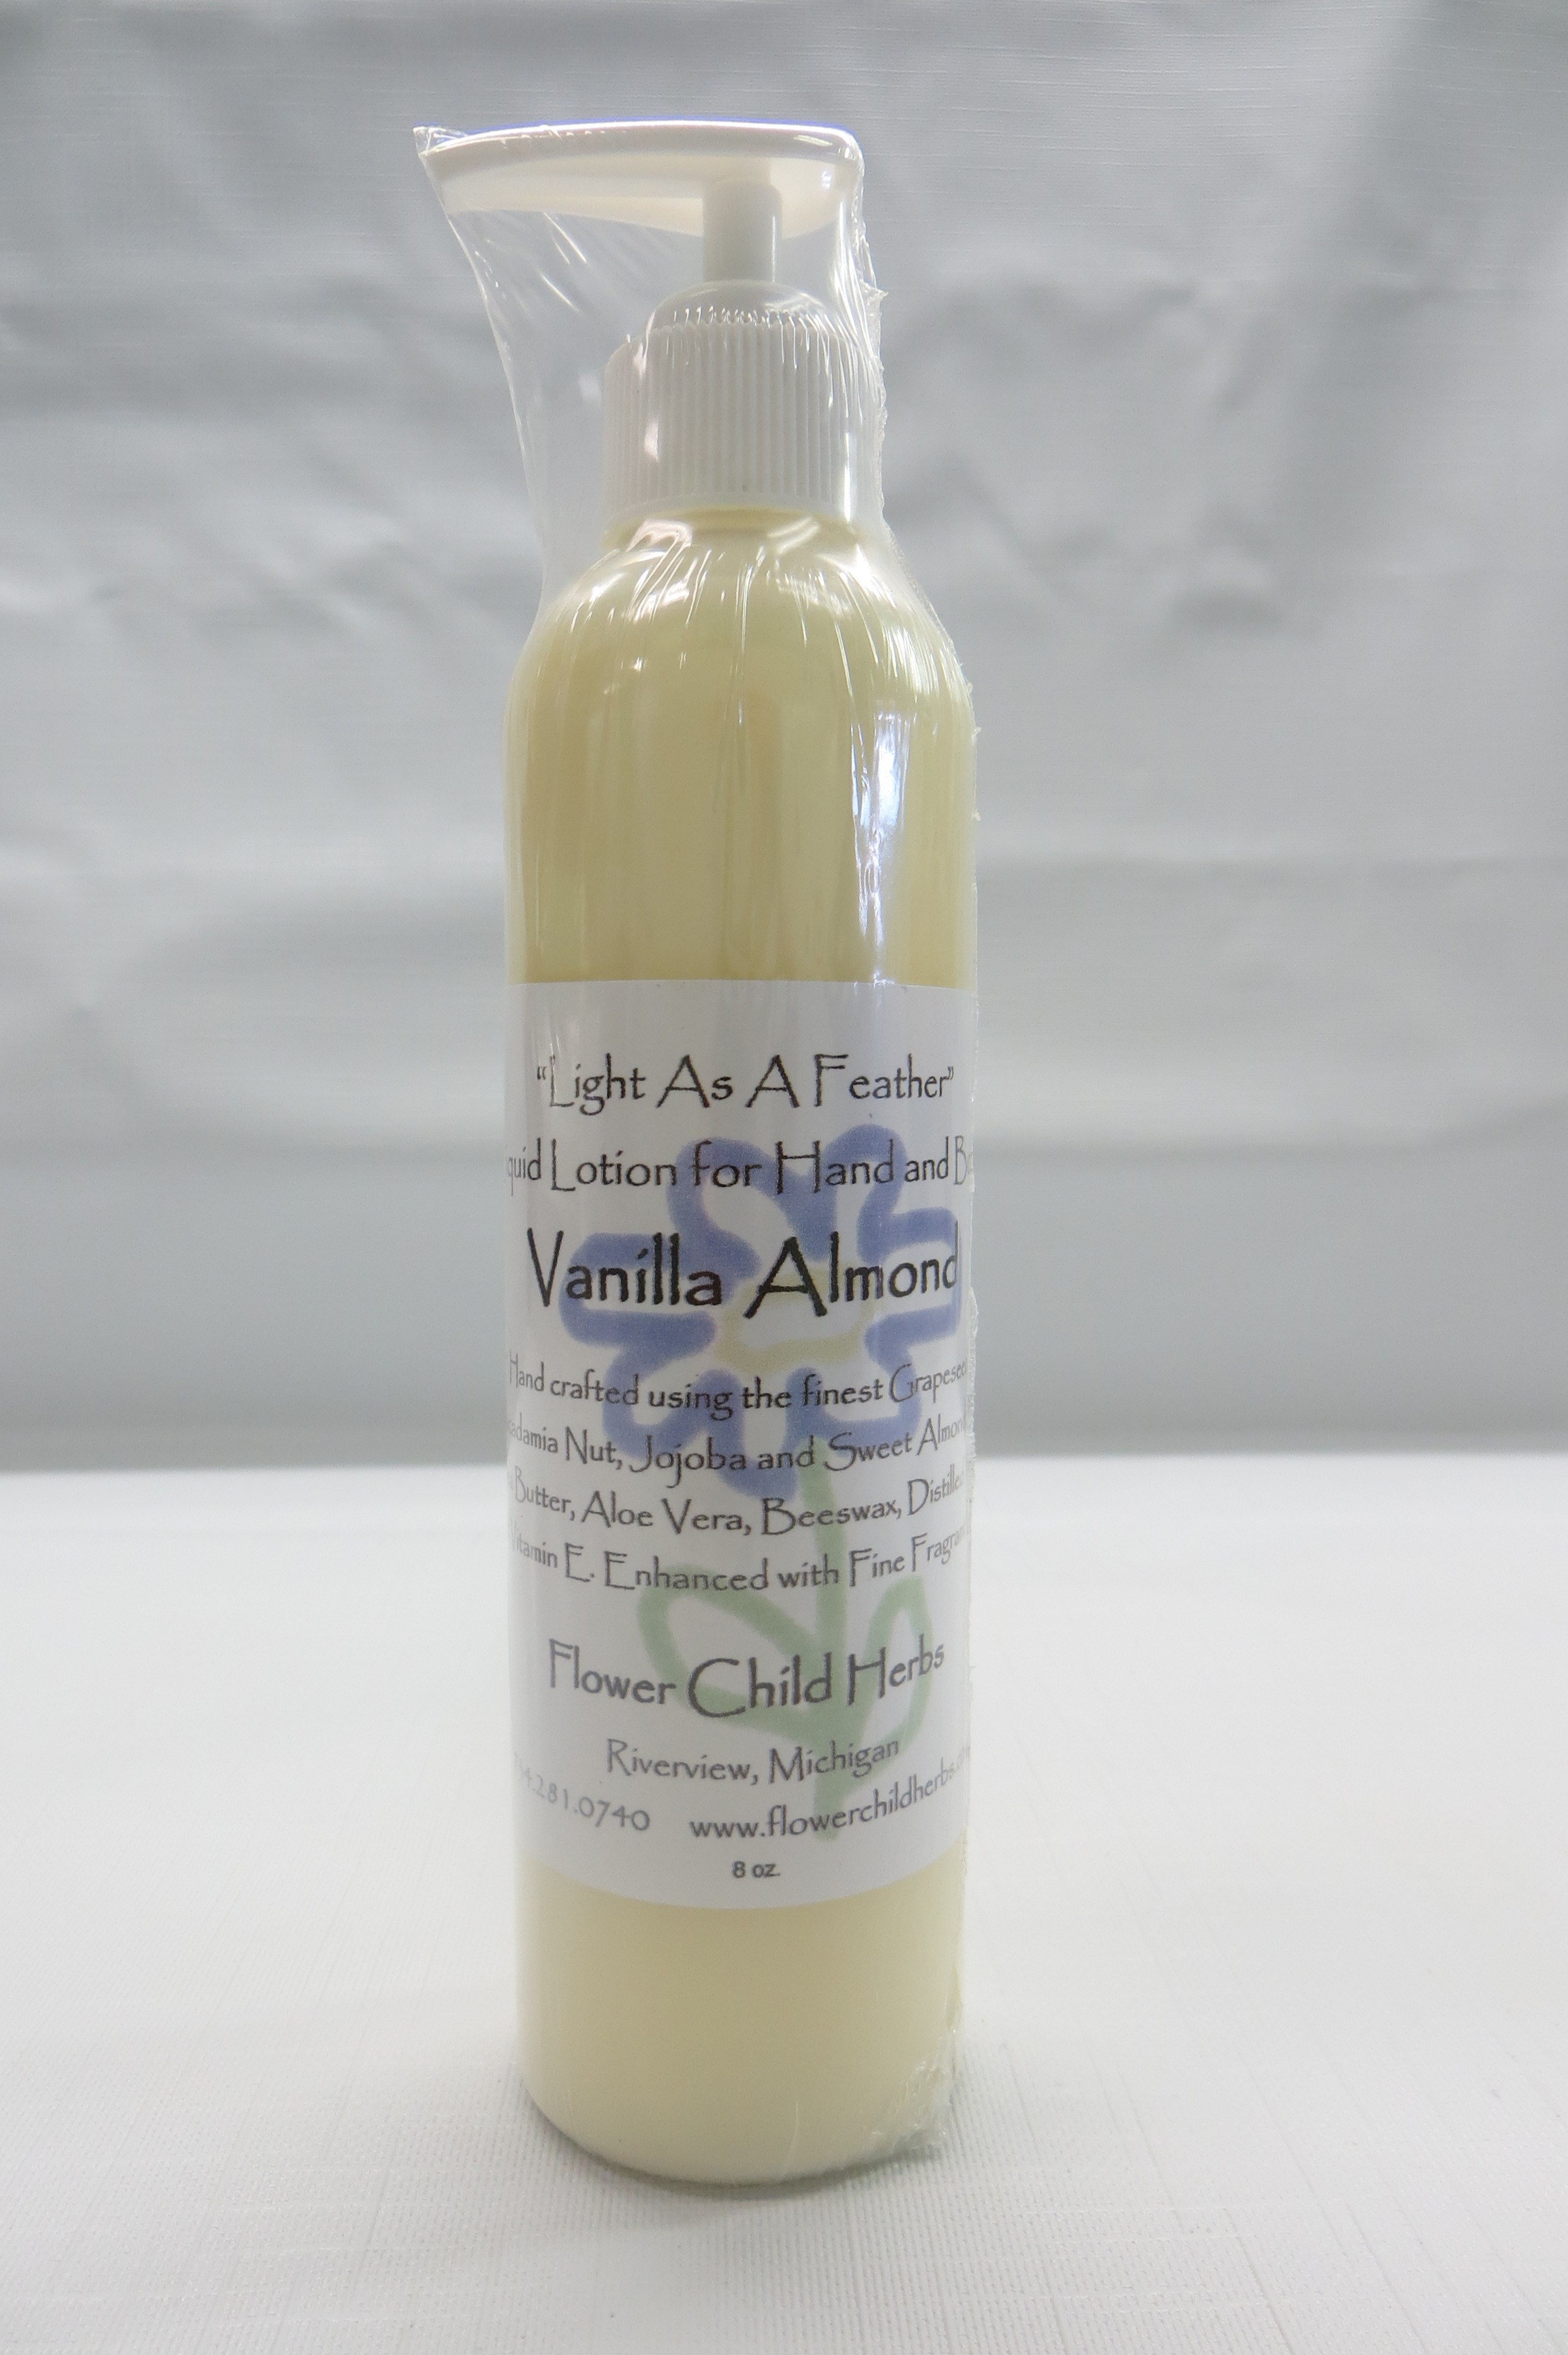 Vanilla Almond "Light as a Feather" Lotion